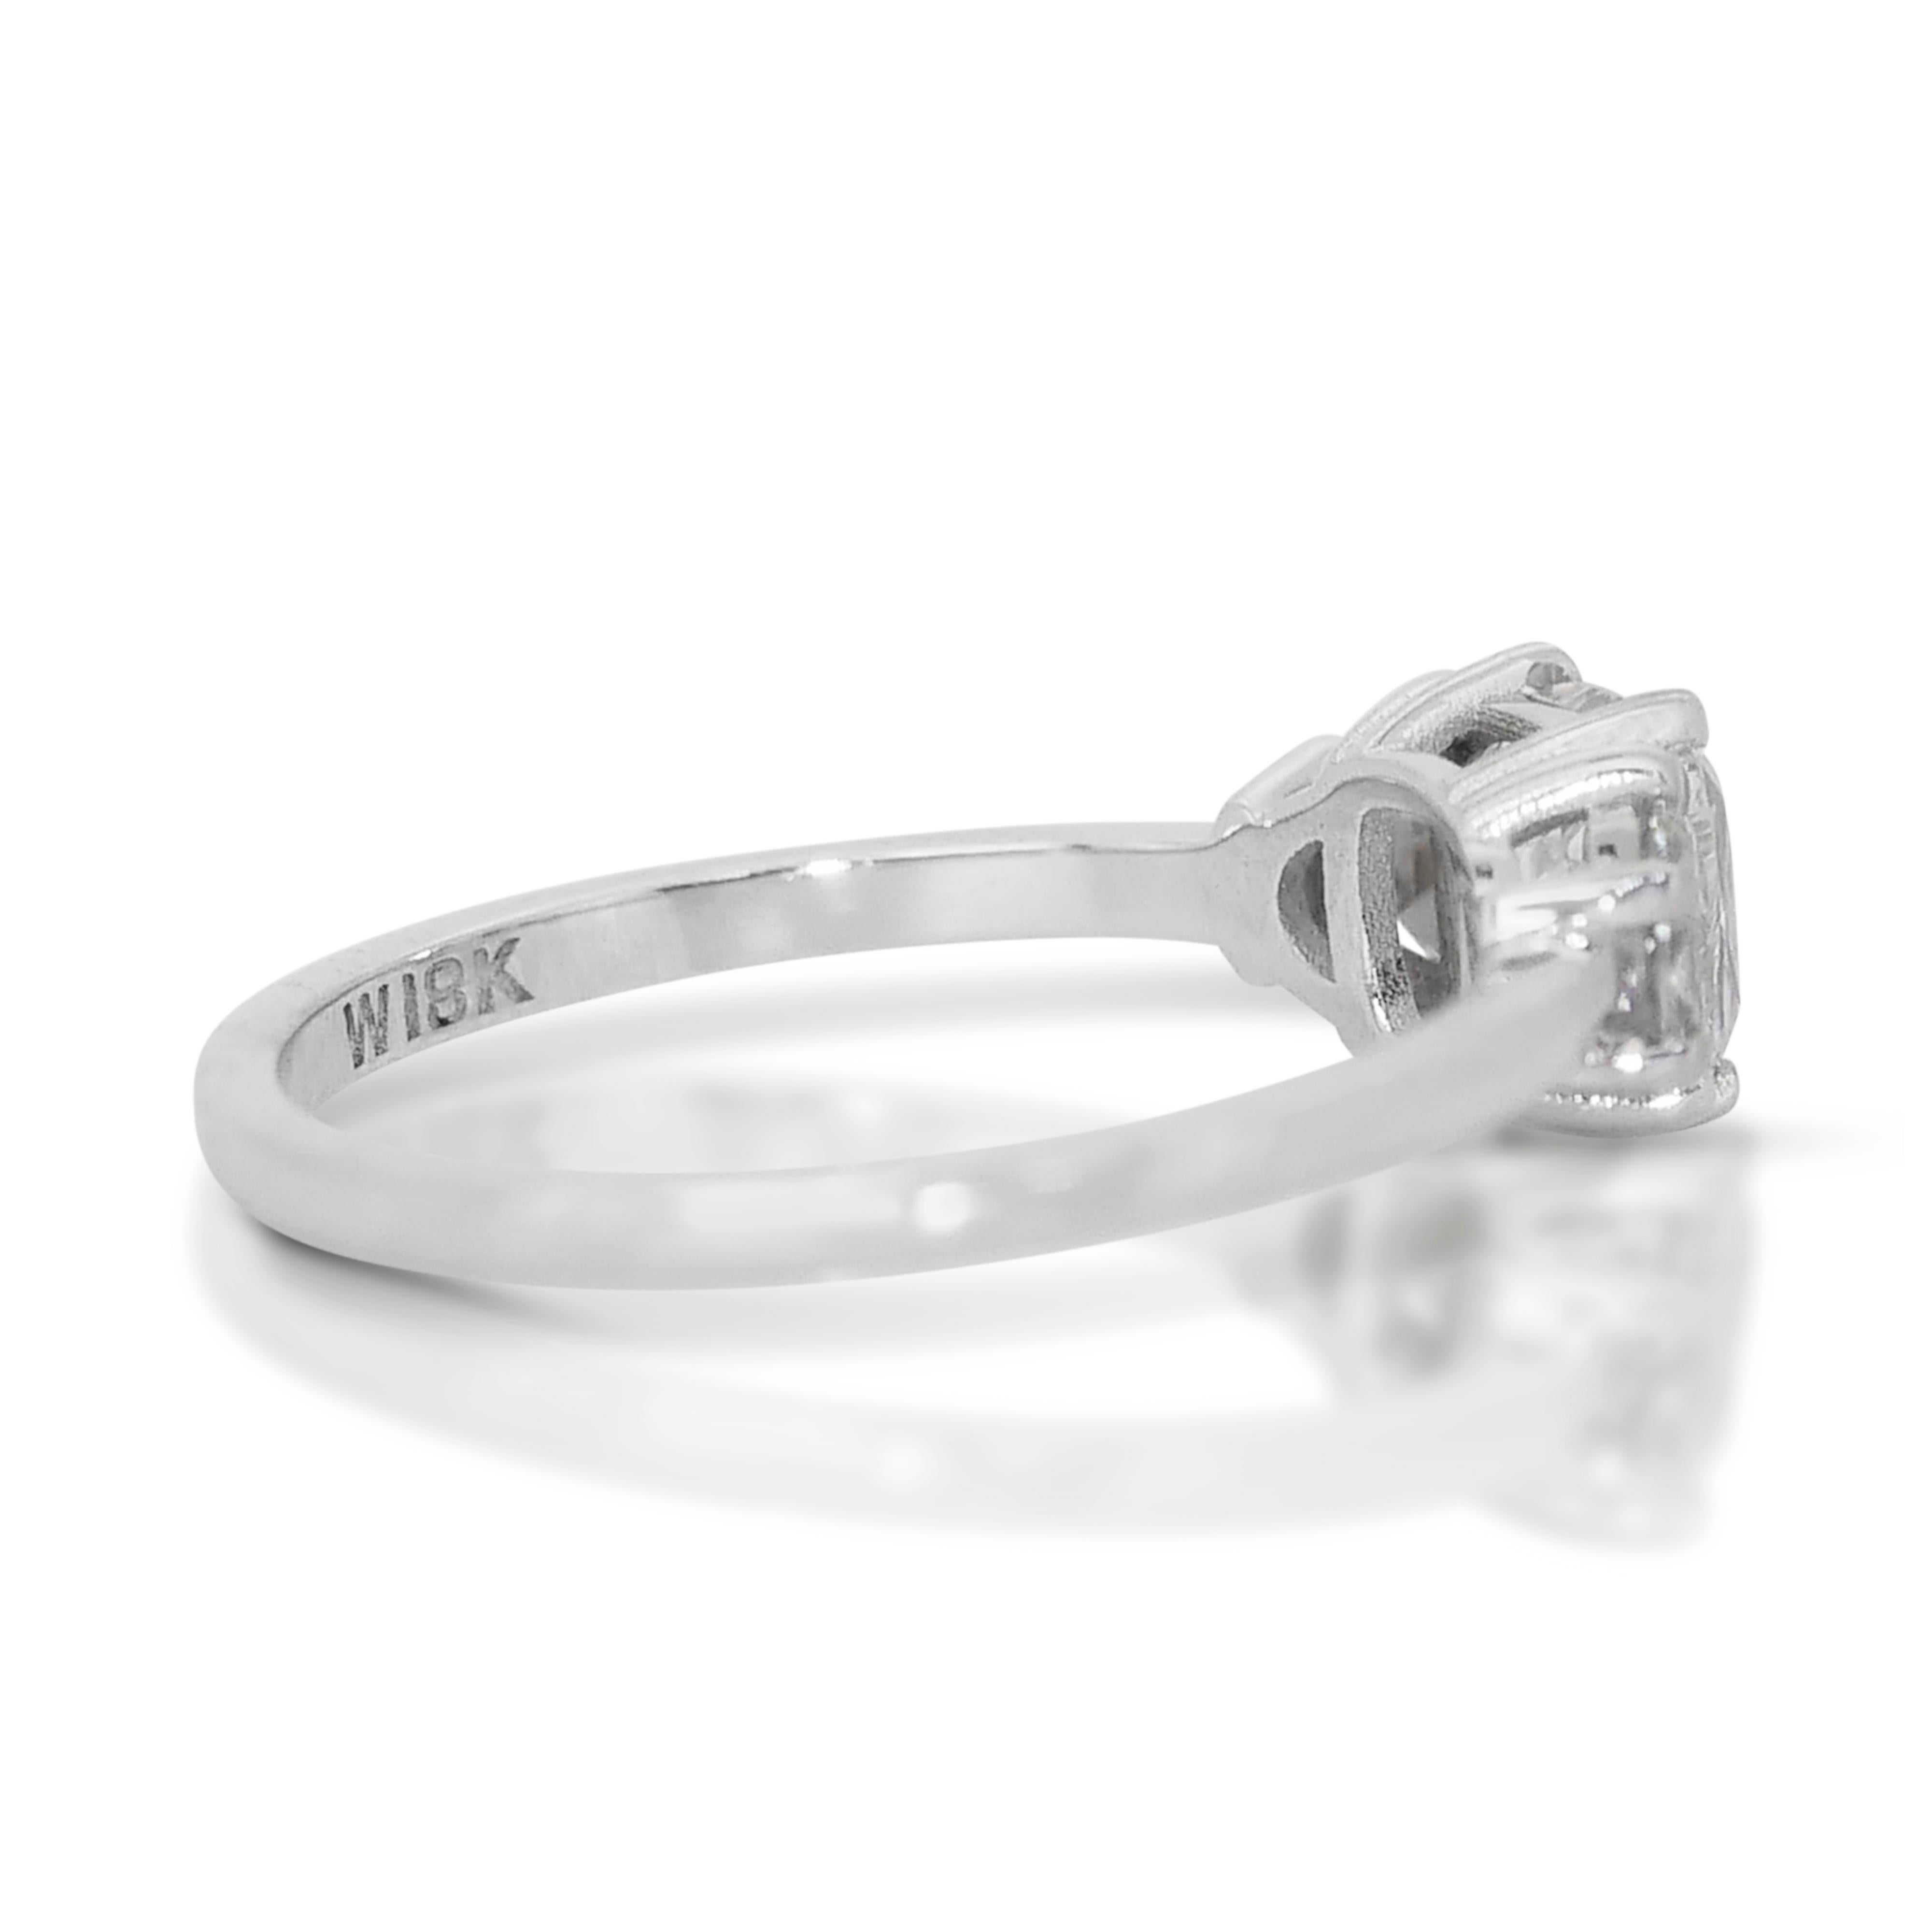 Brilliant Cut Glamorous 18K White Gold Natural Diamond Ring with 1.25 ct - GIA & AIG Certified For Sale